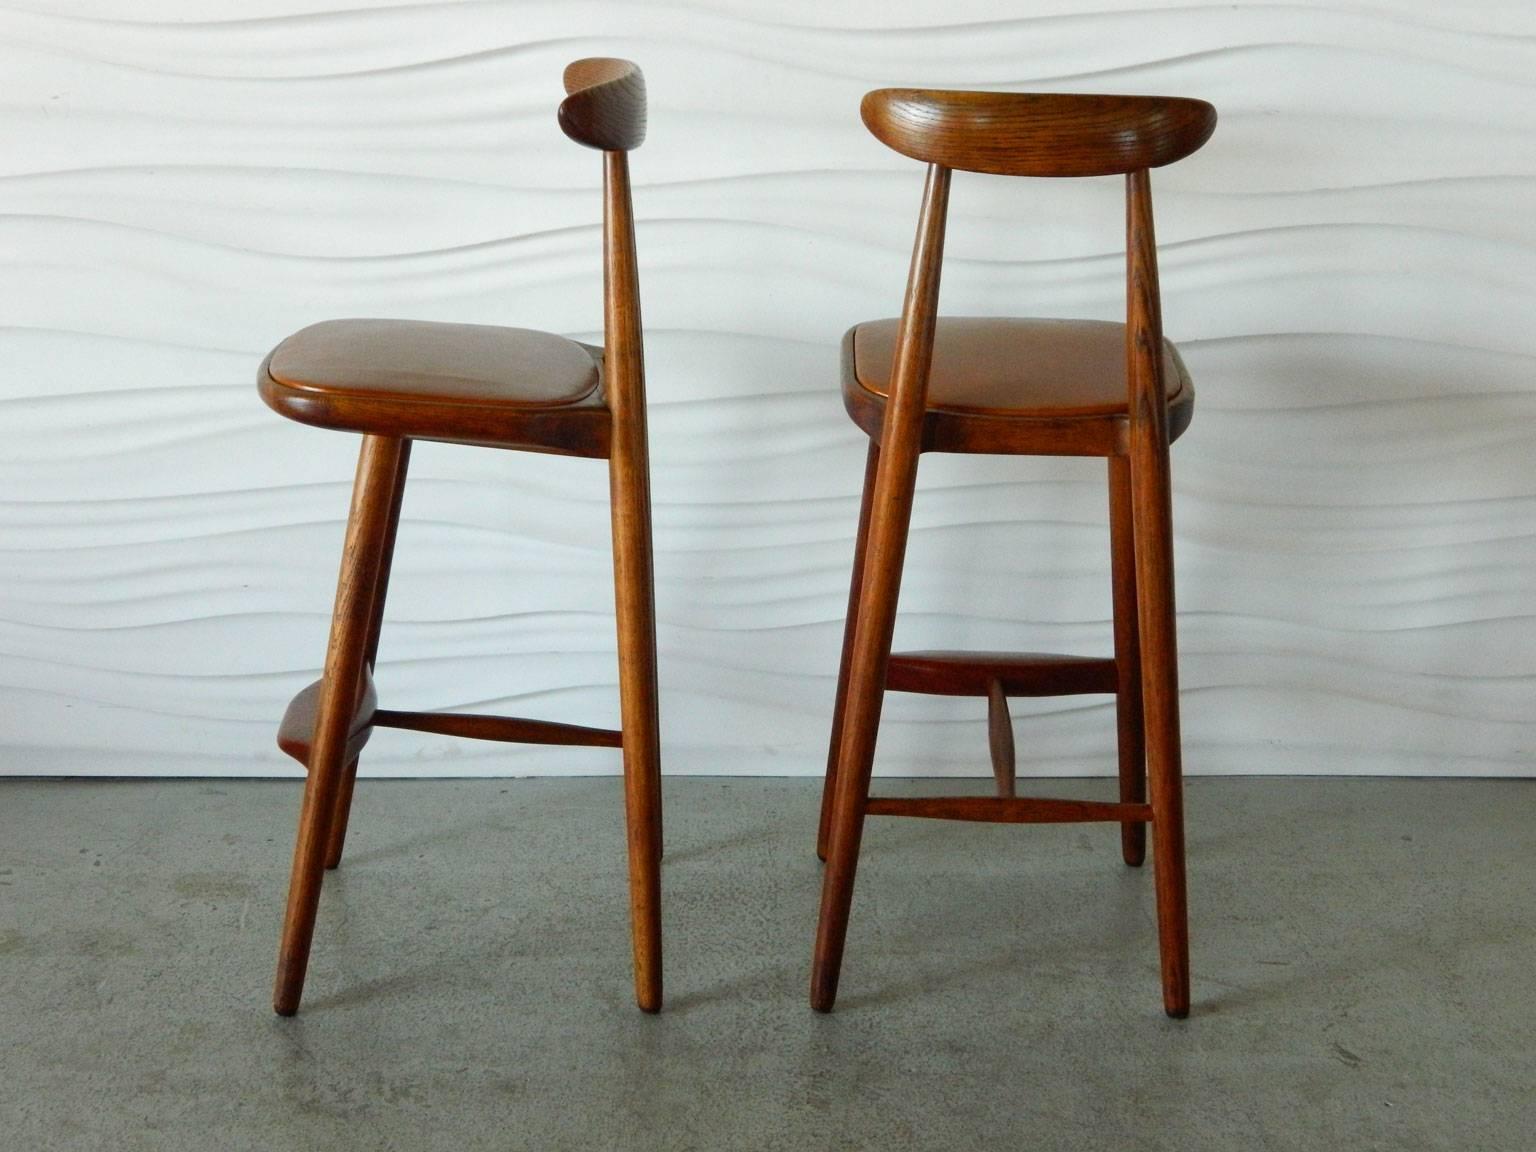 Designed by Danish architect Vilhelm Wohlert in the 1950s, this handsome pair of oak stools have teak footrests and leather-covered seats.